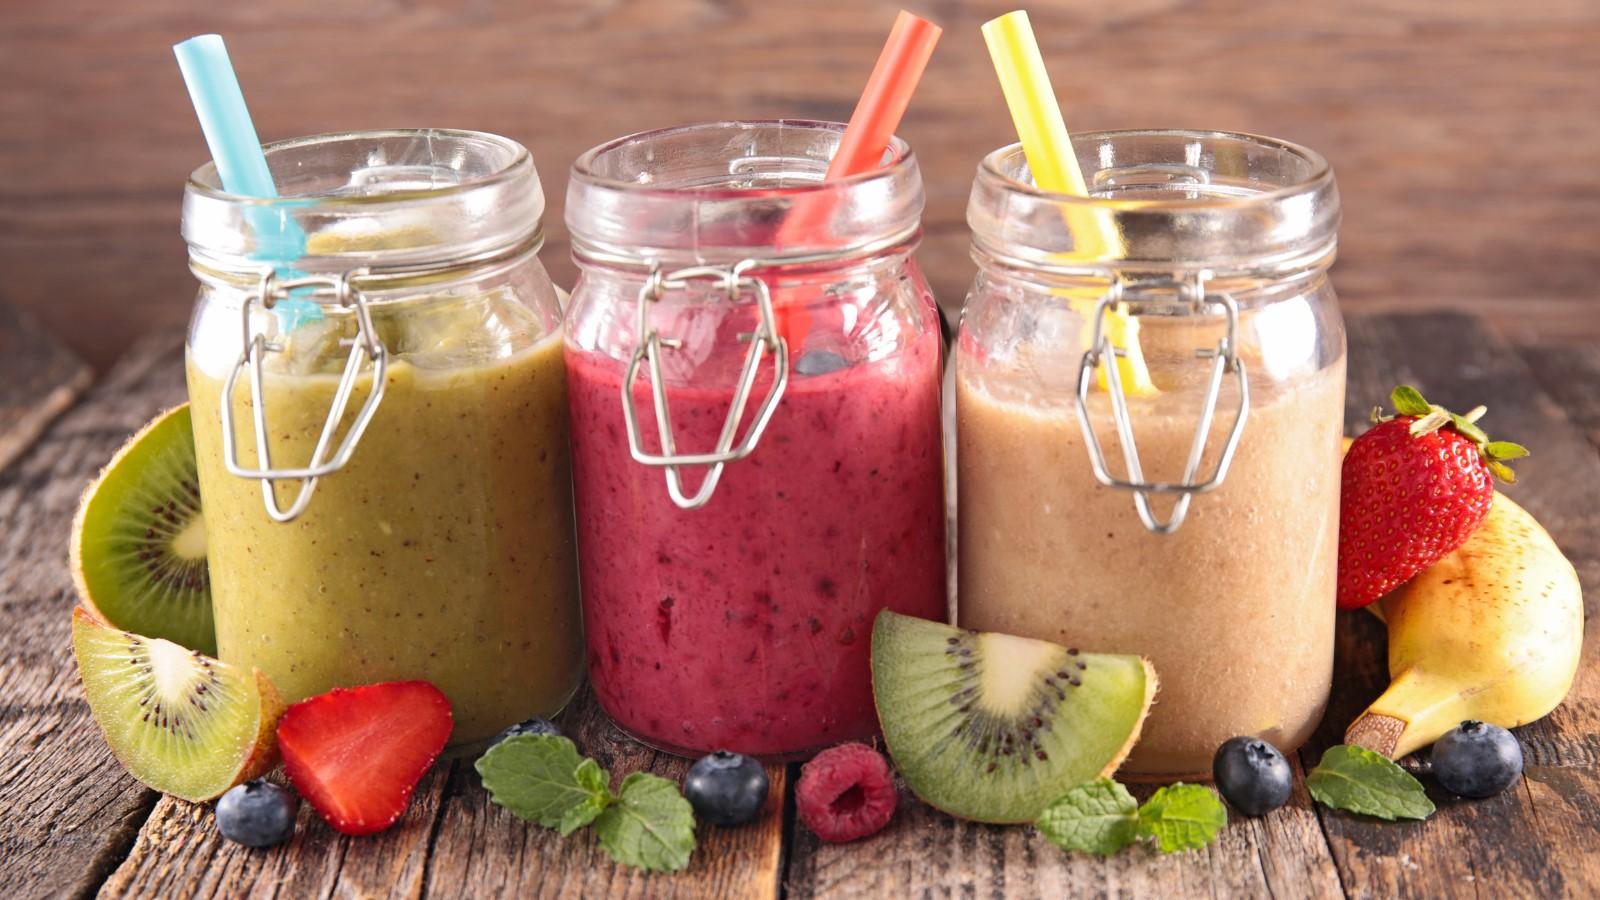 Three different kinds of smoothies - kiwi, berry, and banana with fruits in the front on a wooden background.